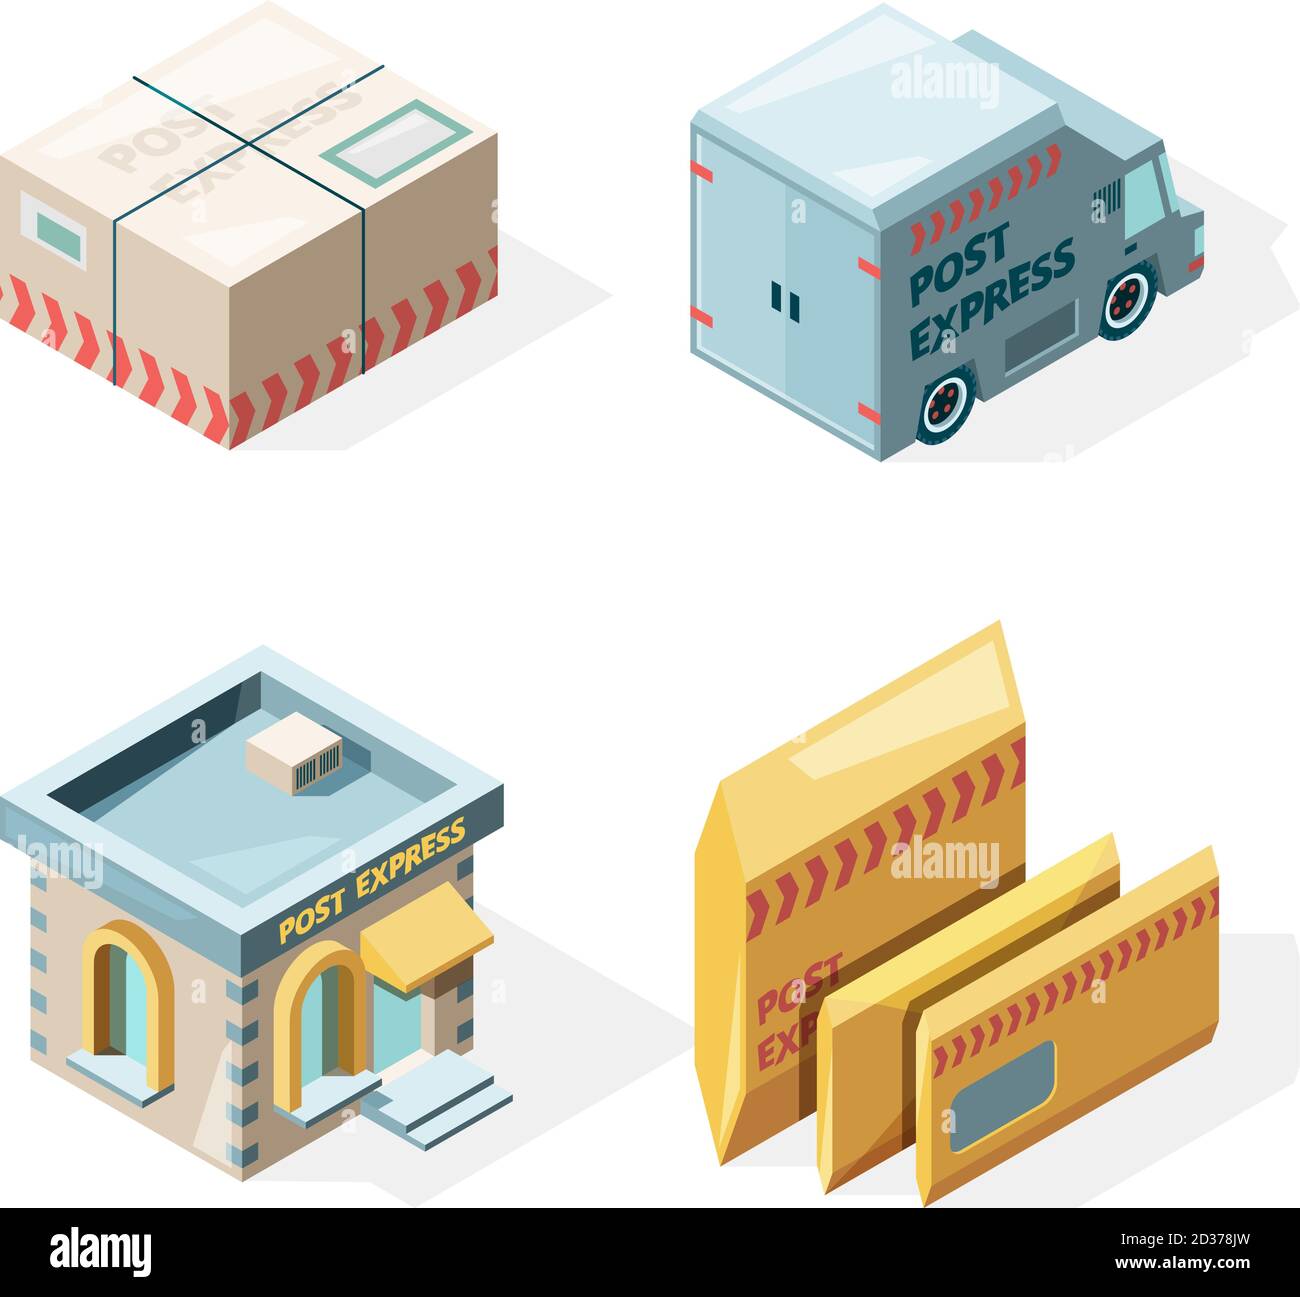 Post office. Mail and package delivery service cargo postbox mailman worker vector isometric pictures Stock Vector